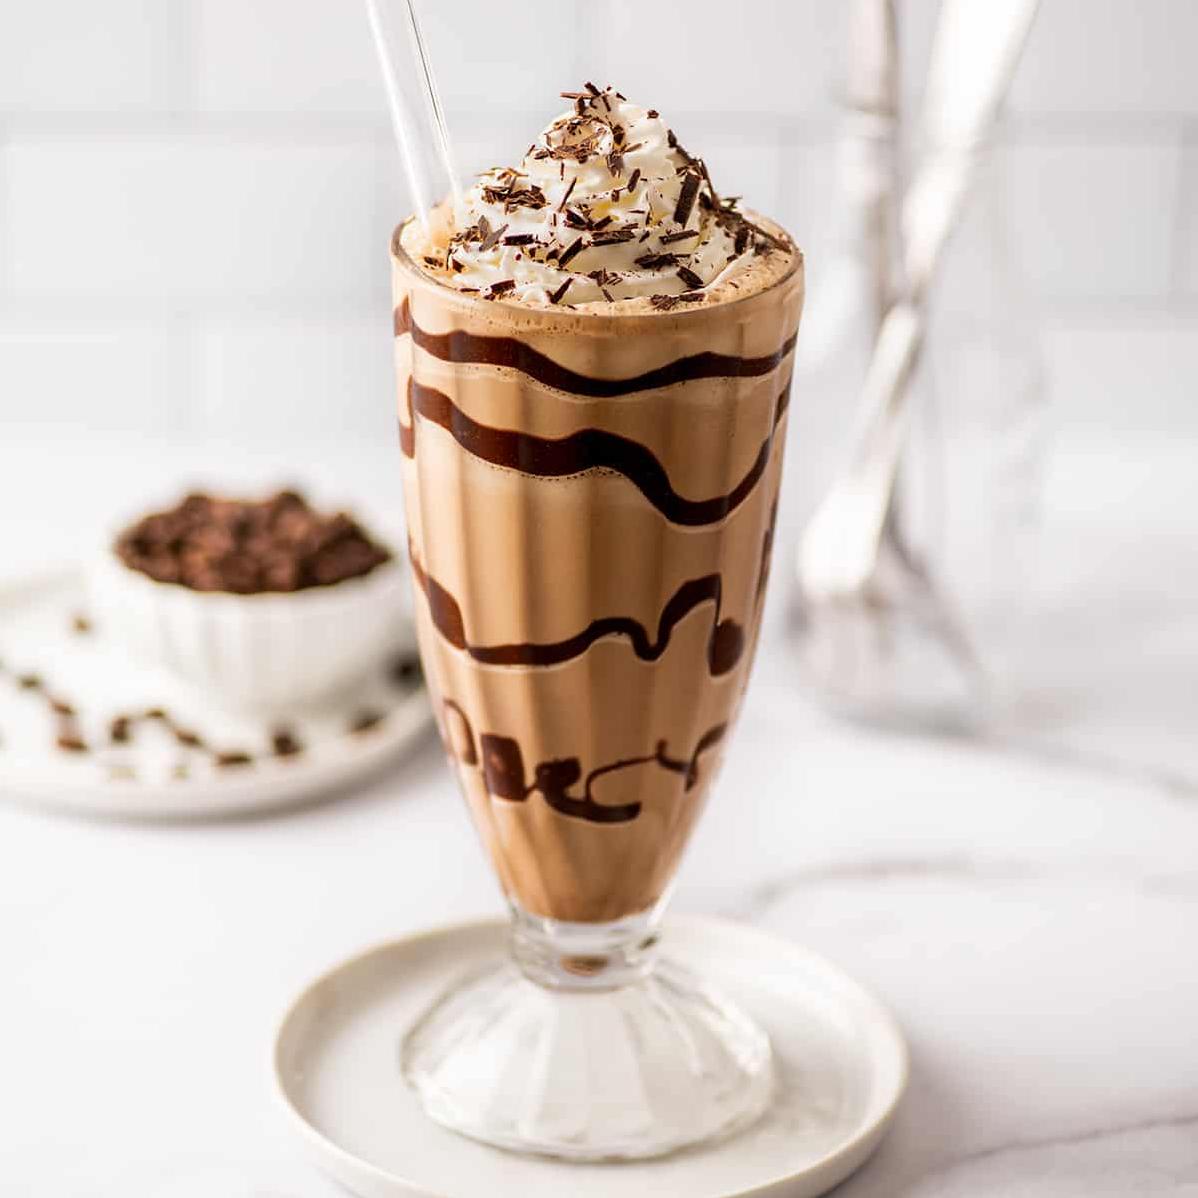  The subtle taste of Kahlua adds an unexpected twist to this classic milkshake